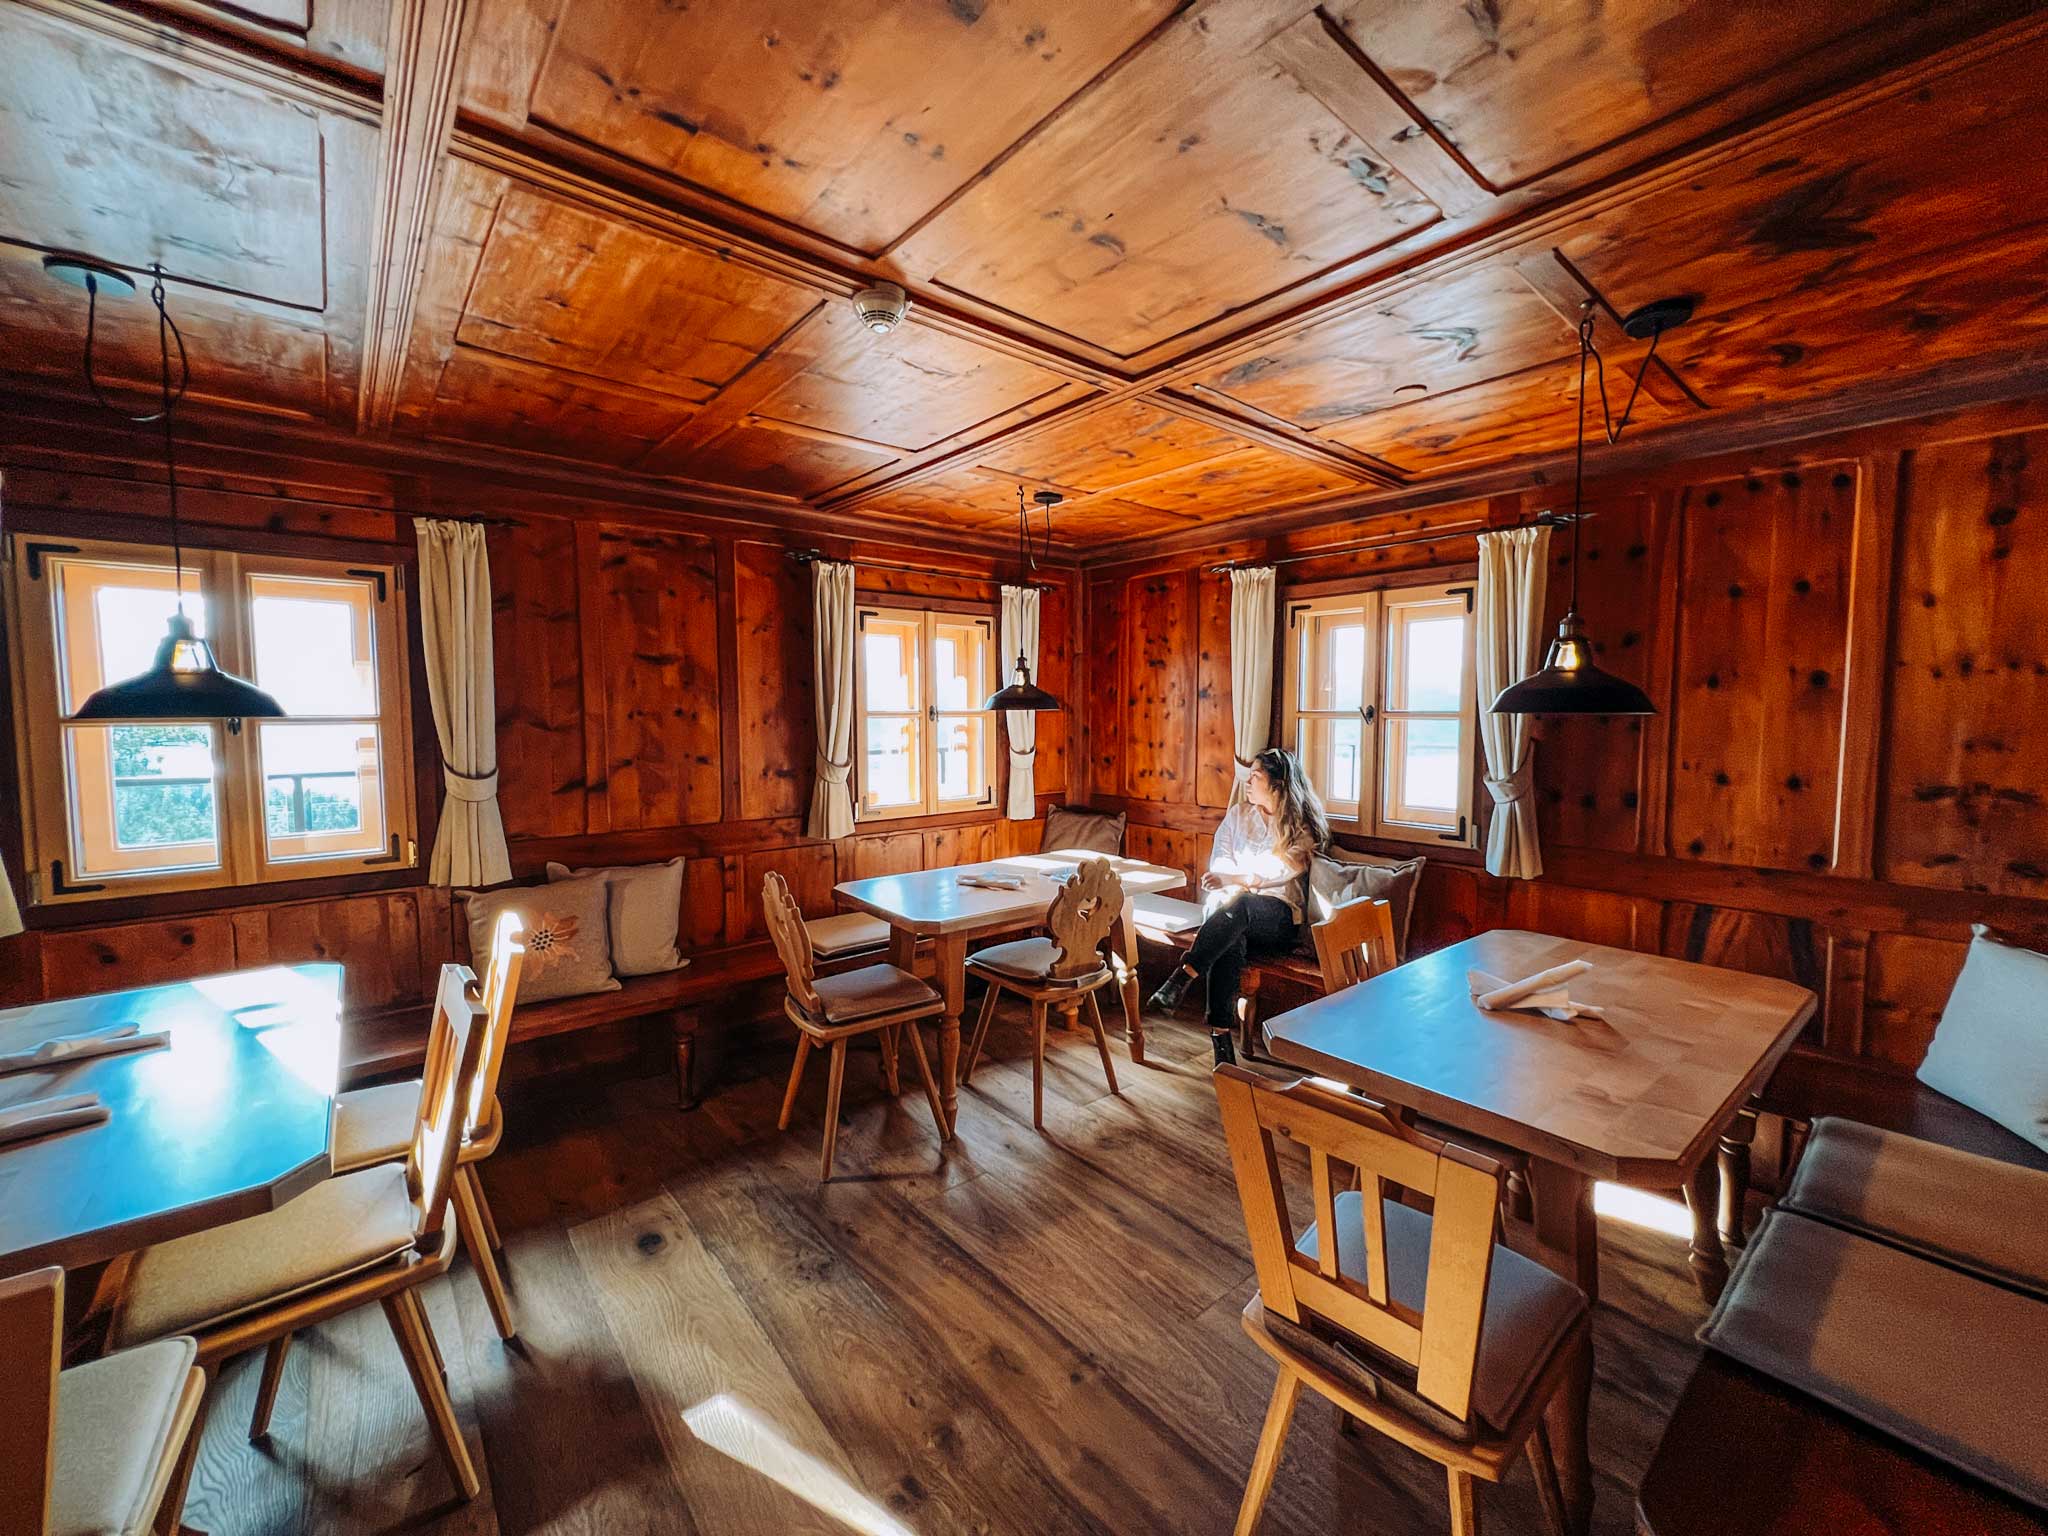 Emma Choo sits at a table in a wooden panelled room at Sparkling Hill Resort. There is sunlight coming through the windows.